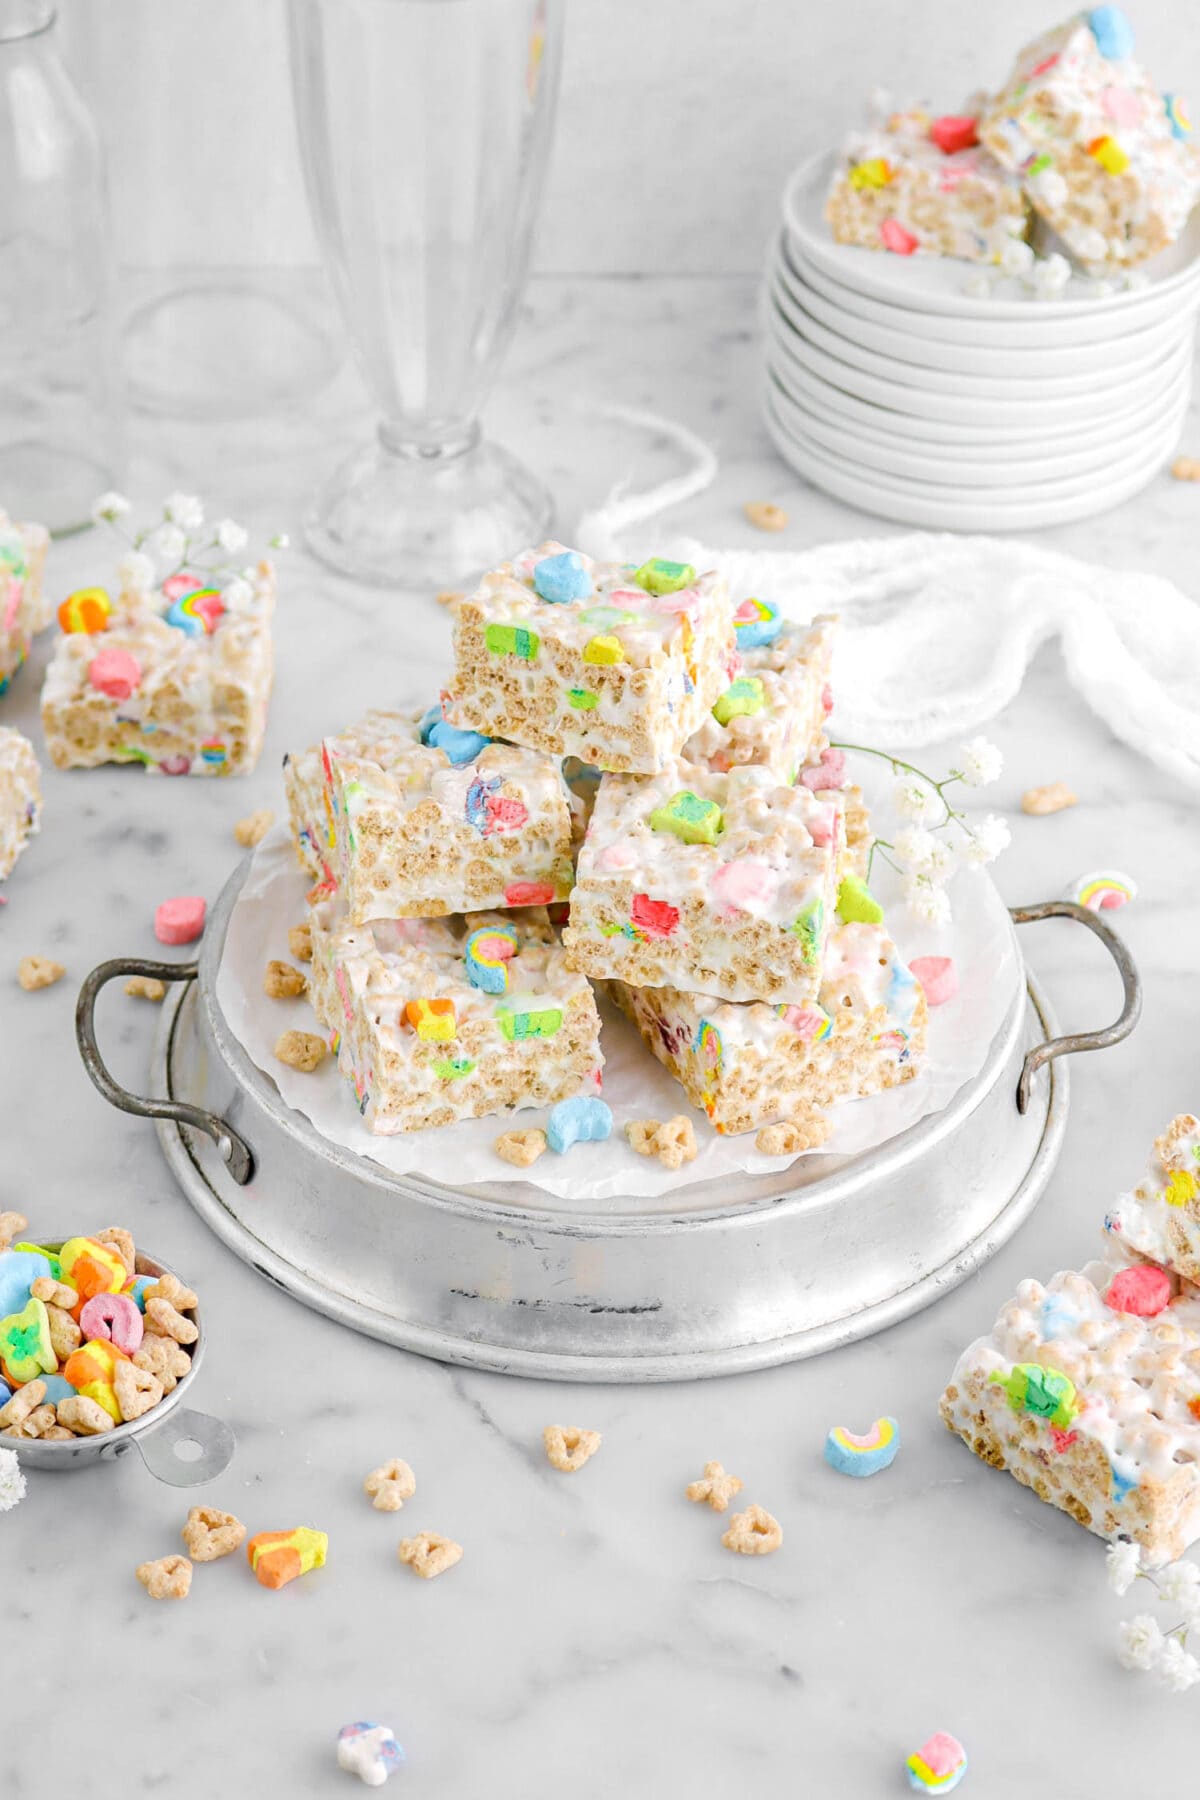 angled shot of stacked lucky charms marshmallow treats with more cereal and marshmallow treats around on marble surface.